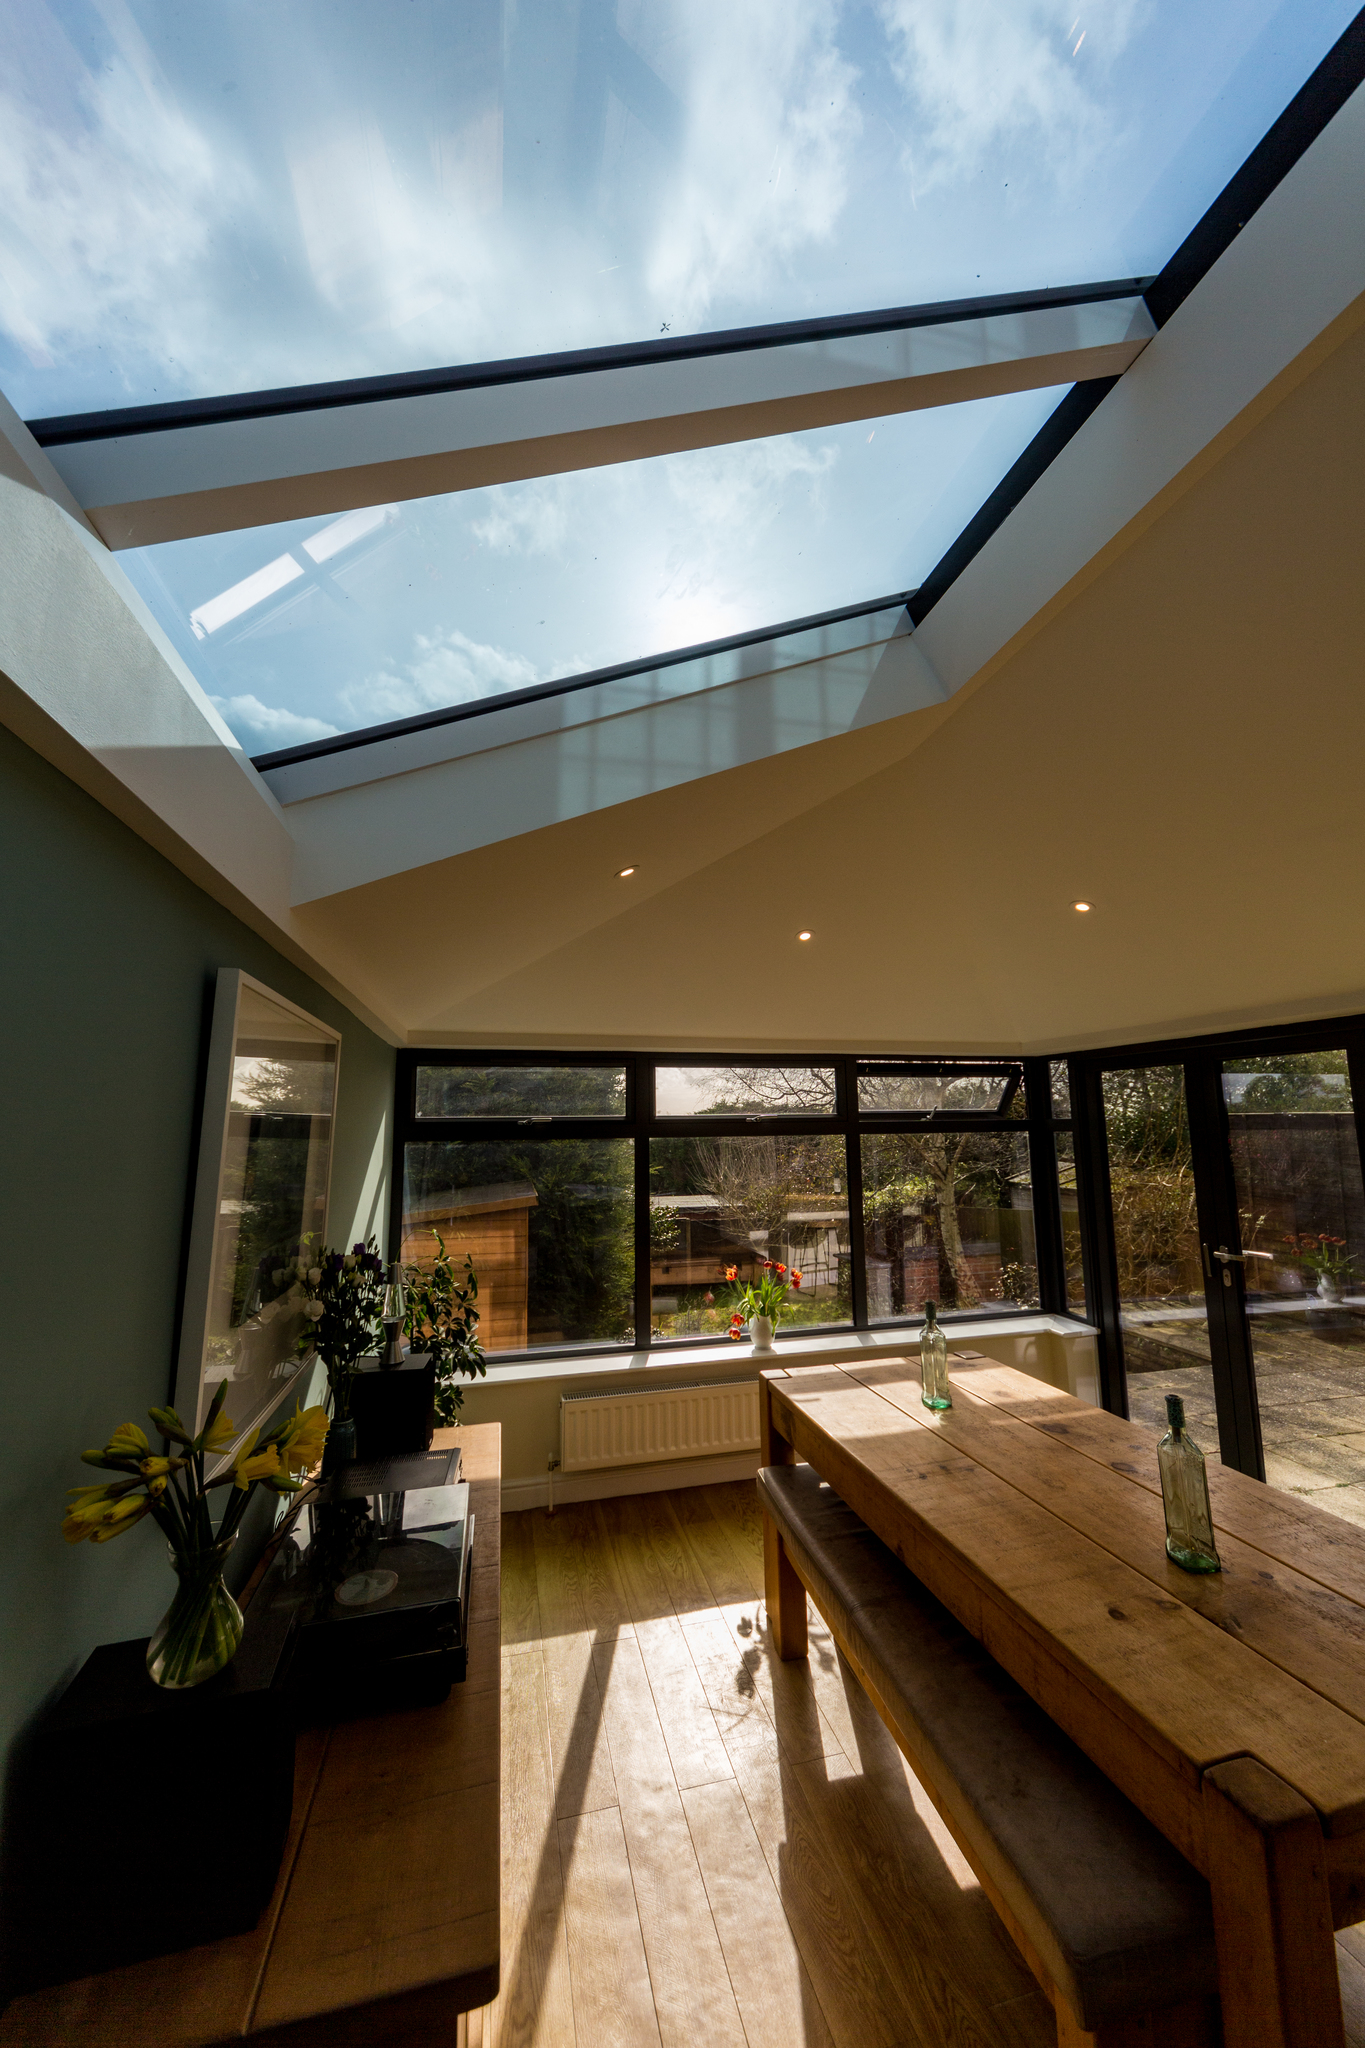 Radiant and roomy example of a conservatory and skylight design.